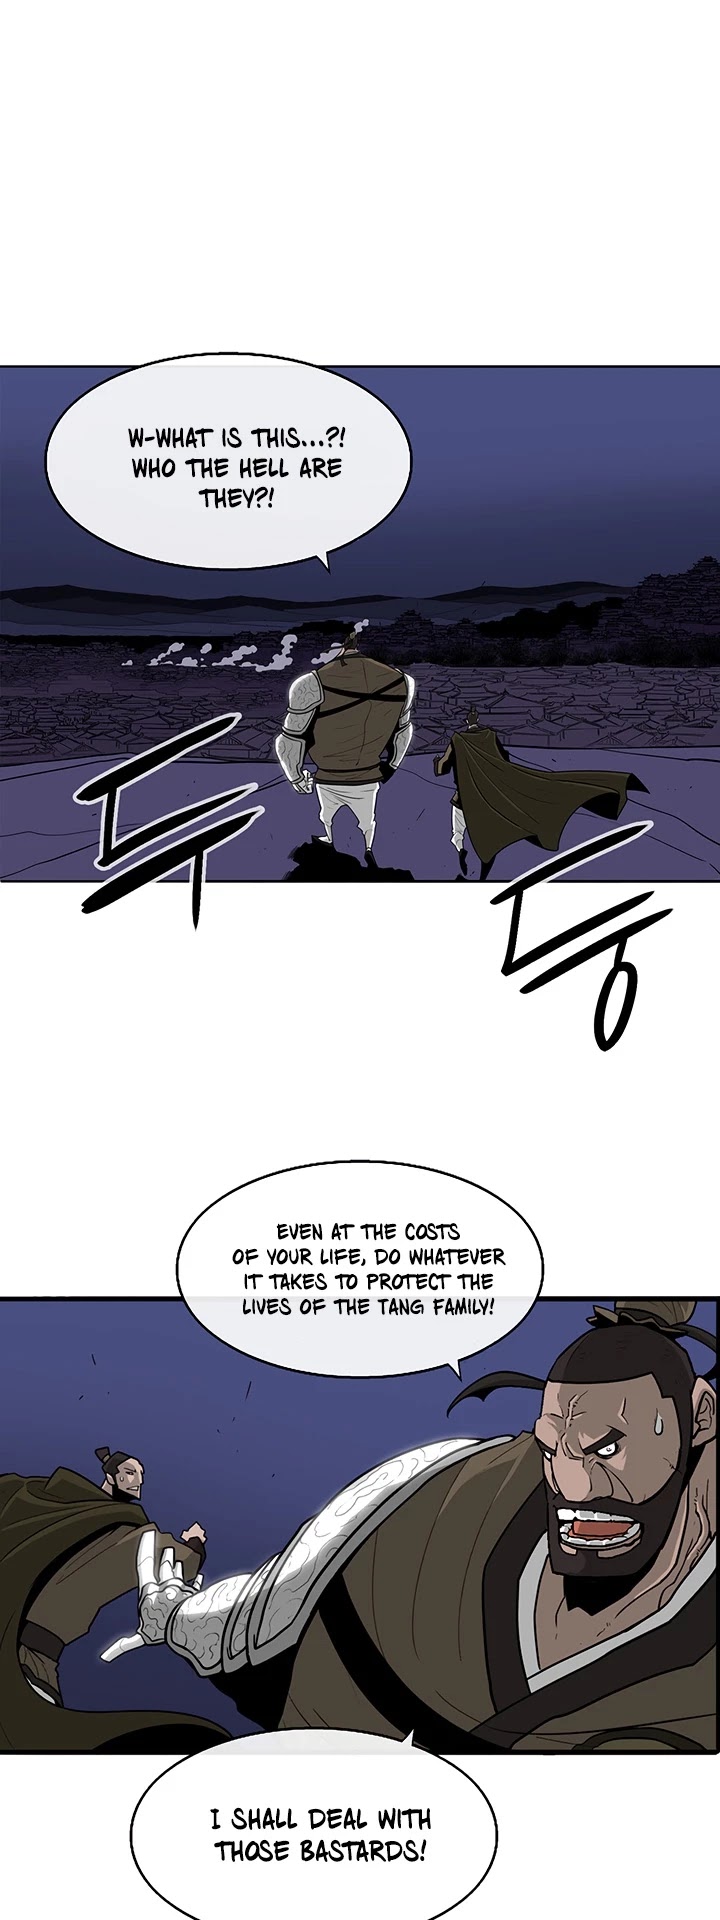 Legend Of The Northern Blade Chapter 42